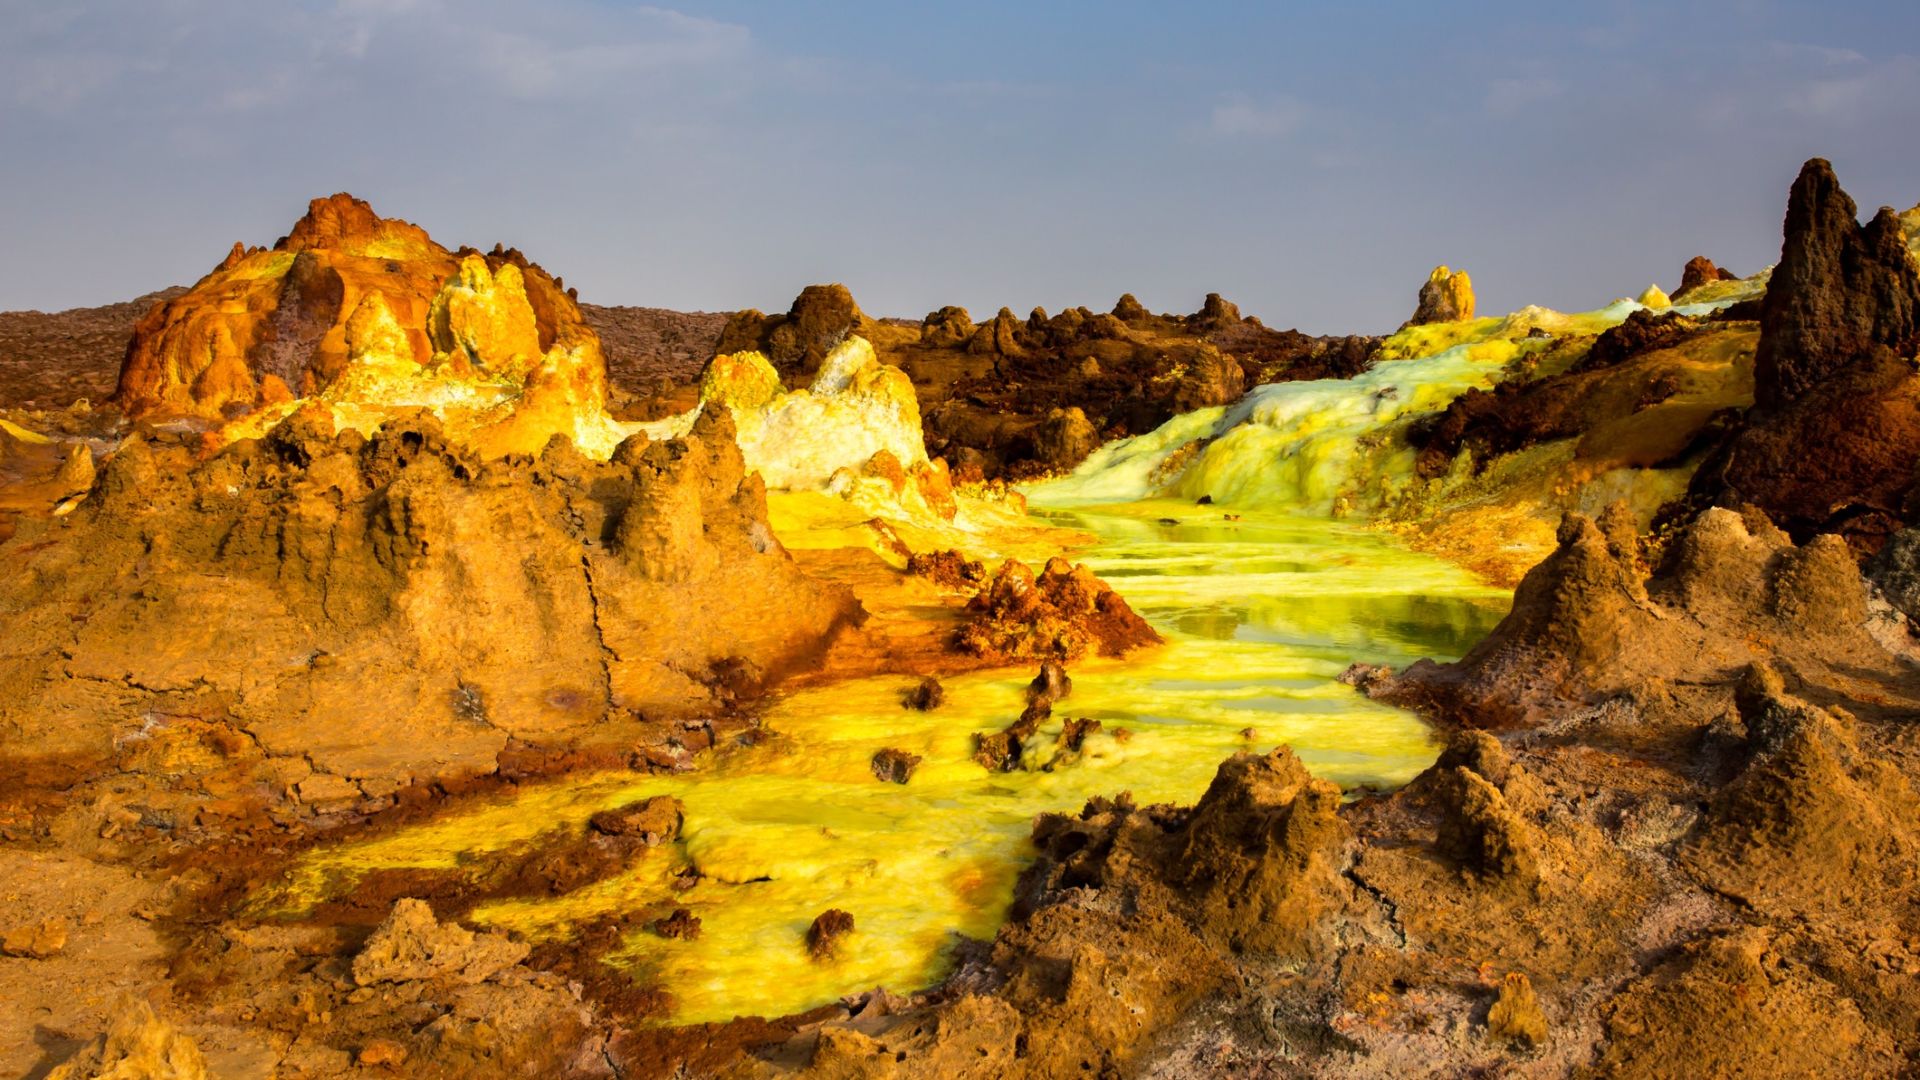 <p>                     The Danakil Depression, Ethiopia, is one of the most inhospitable and alien places on Earth. Known as the "gateway to hell" according to the BBC, the Danakil Depression is probably the closest you'll ever be able to come to standing on the surface of Venus (without the crushing atmosphere, of course). Choking sulphuric acid and chlorine gases fill the air, while acid ponds and geysers pepper the landscape.                    </p>                                      <p>                     According to the BBC, temperatures in this region regularly reach 113 degrees Fahrenheit (45 degrees Celsius), making it one of the hottest places on Earth.                   </p>                                      <p>                     The Danakil Depression lies over 330 feet (100 m) below sea level in a rift valley. Rift valleys are formed when tectonic plates move apart at a "divergent plate boundary," according to The Geological Society. The underlying volcanic activity sculpts the landscape as Earth is pulled apart at the seams. Some of the Danakil Depression features can even be seen from space, according to NASA Earth Observatory.                   </p>